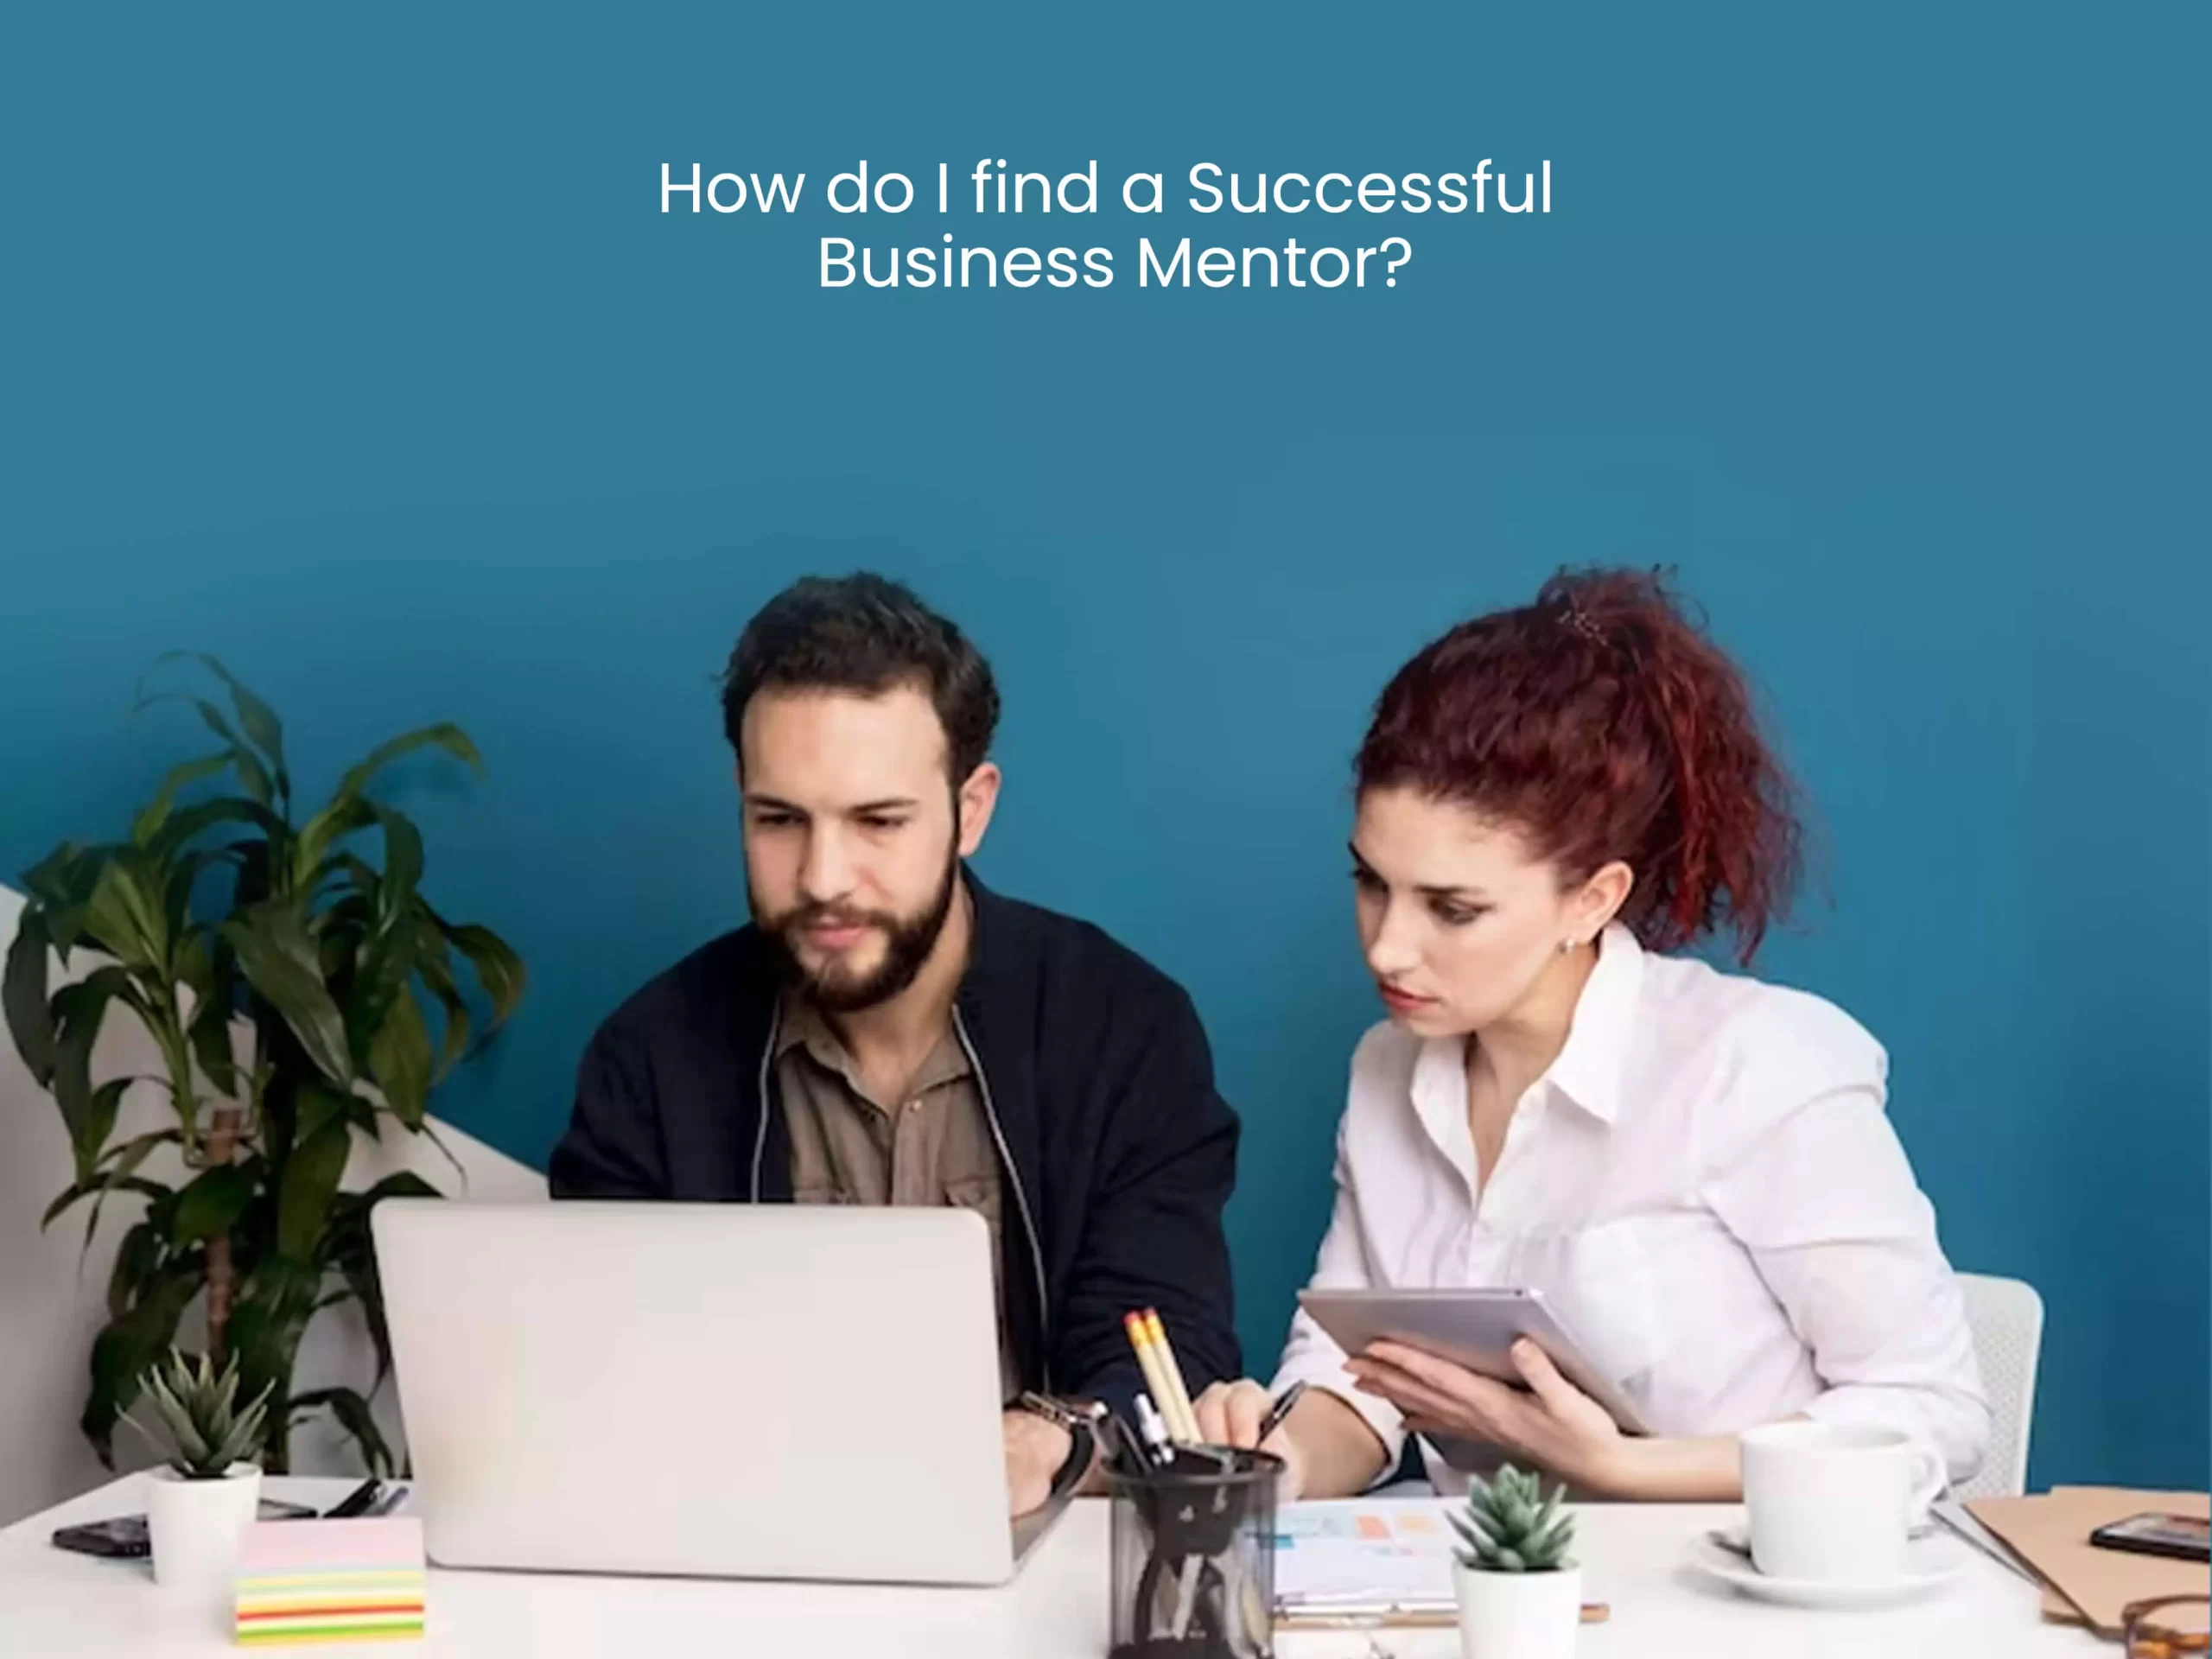 How do I find a successful business mentor?